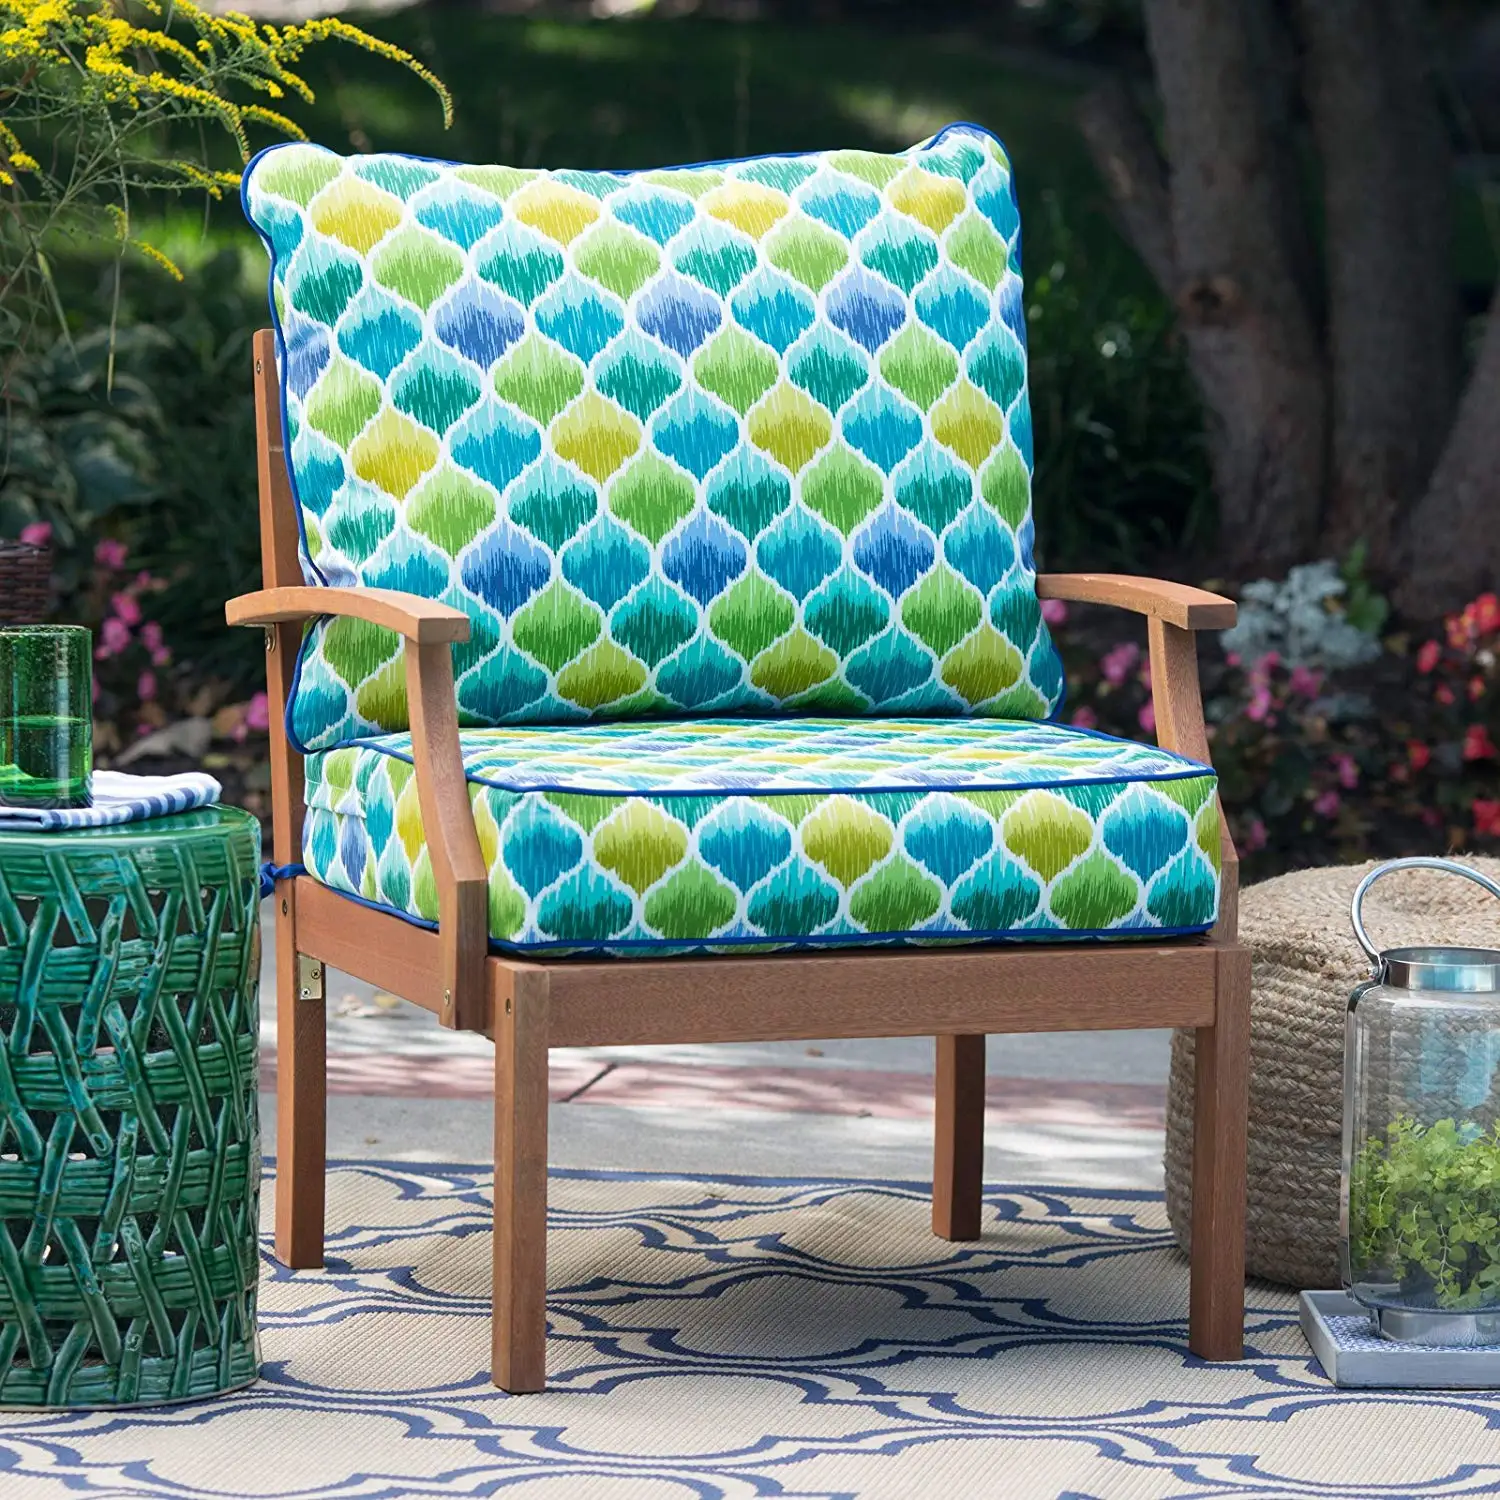 Unique Chair Cushions Outdoor Cheap for Large Space